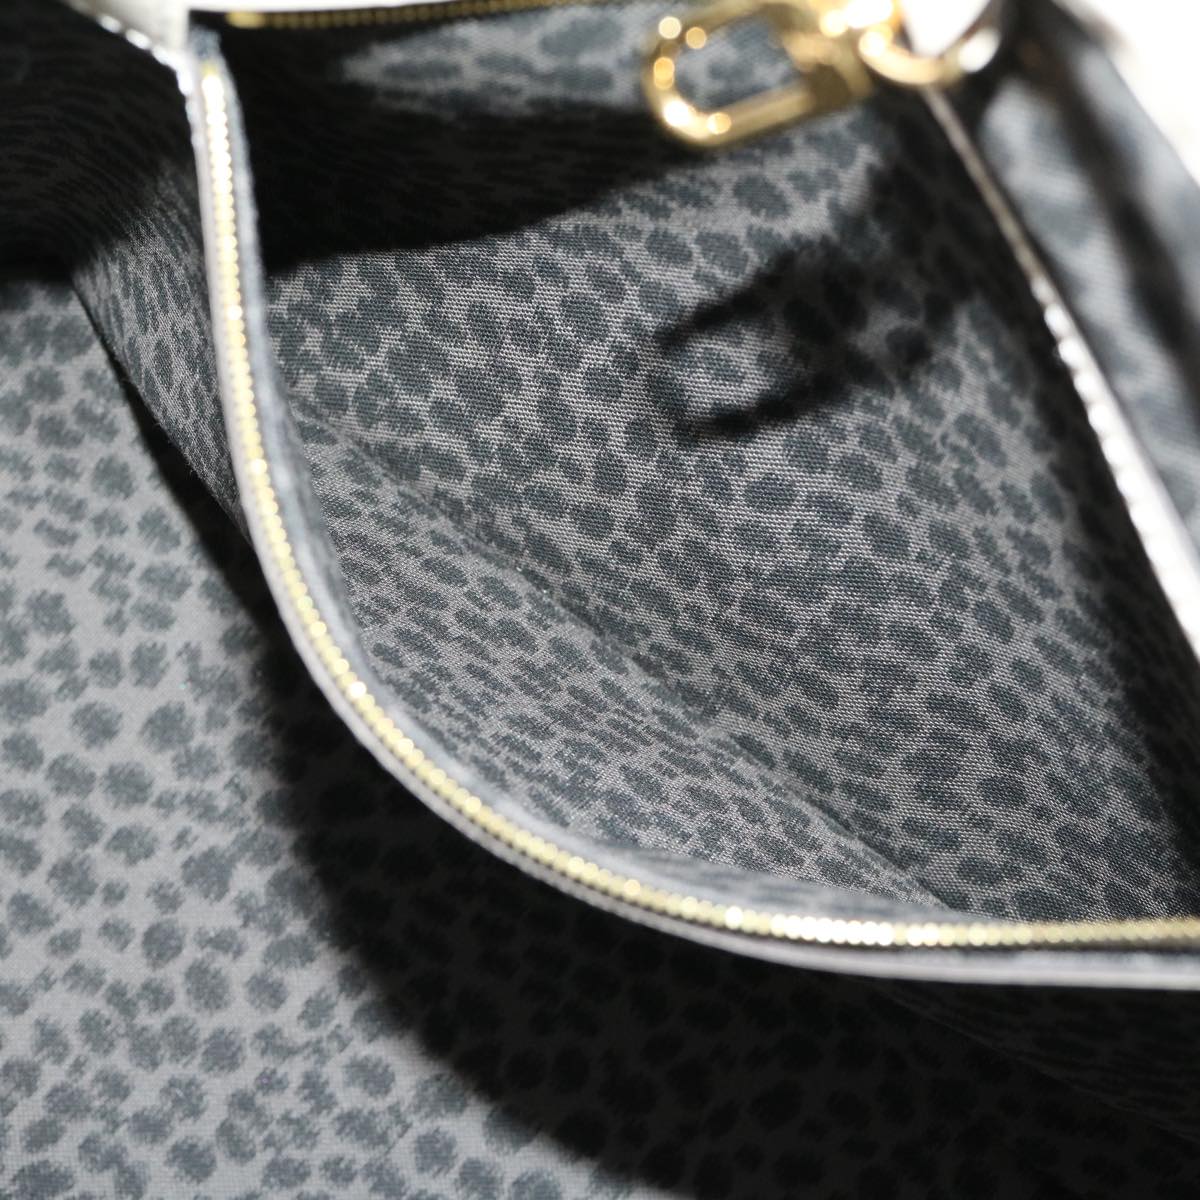 LOUIS VUITTON Monogram Wild at Heart Neverfull MM Tote Bag M45819 Auth 30747A